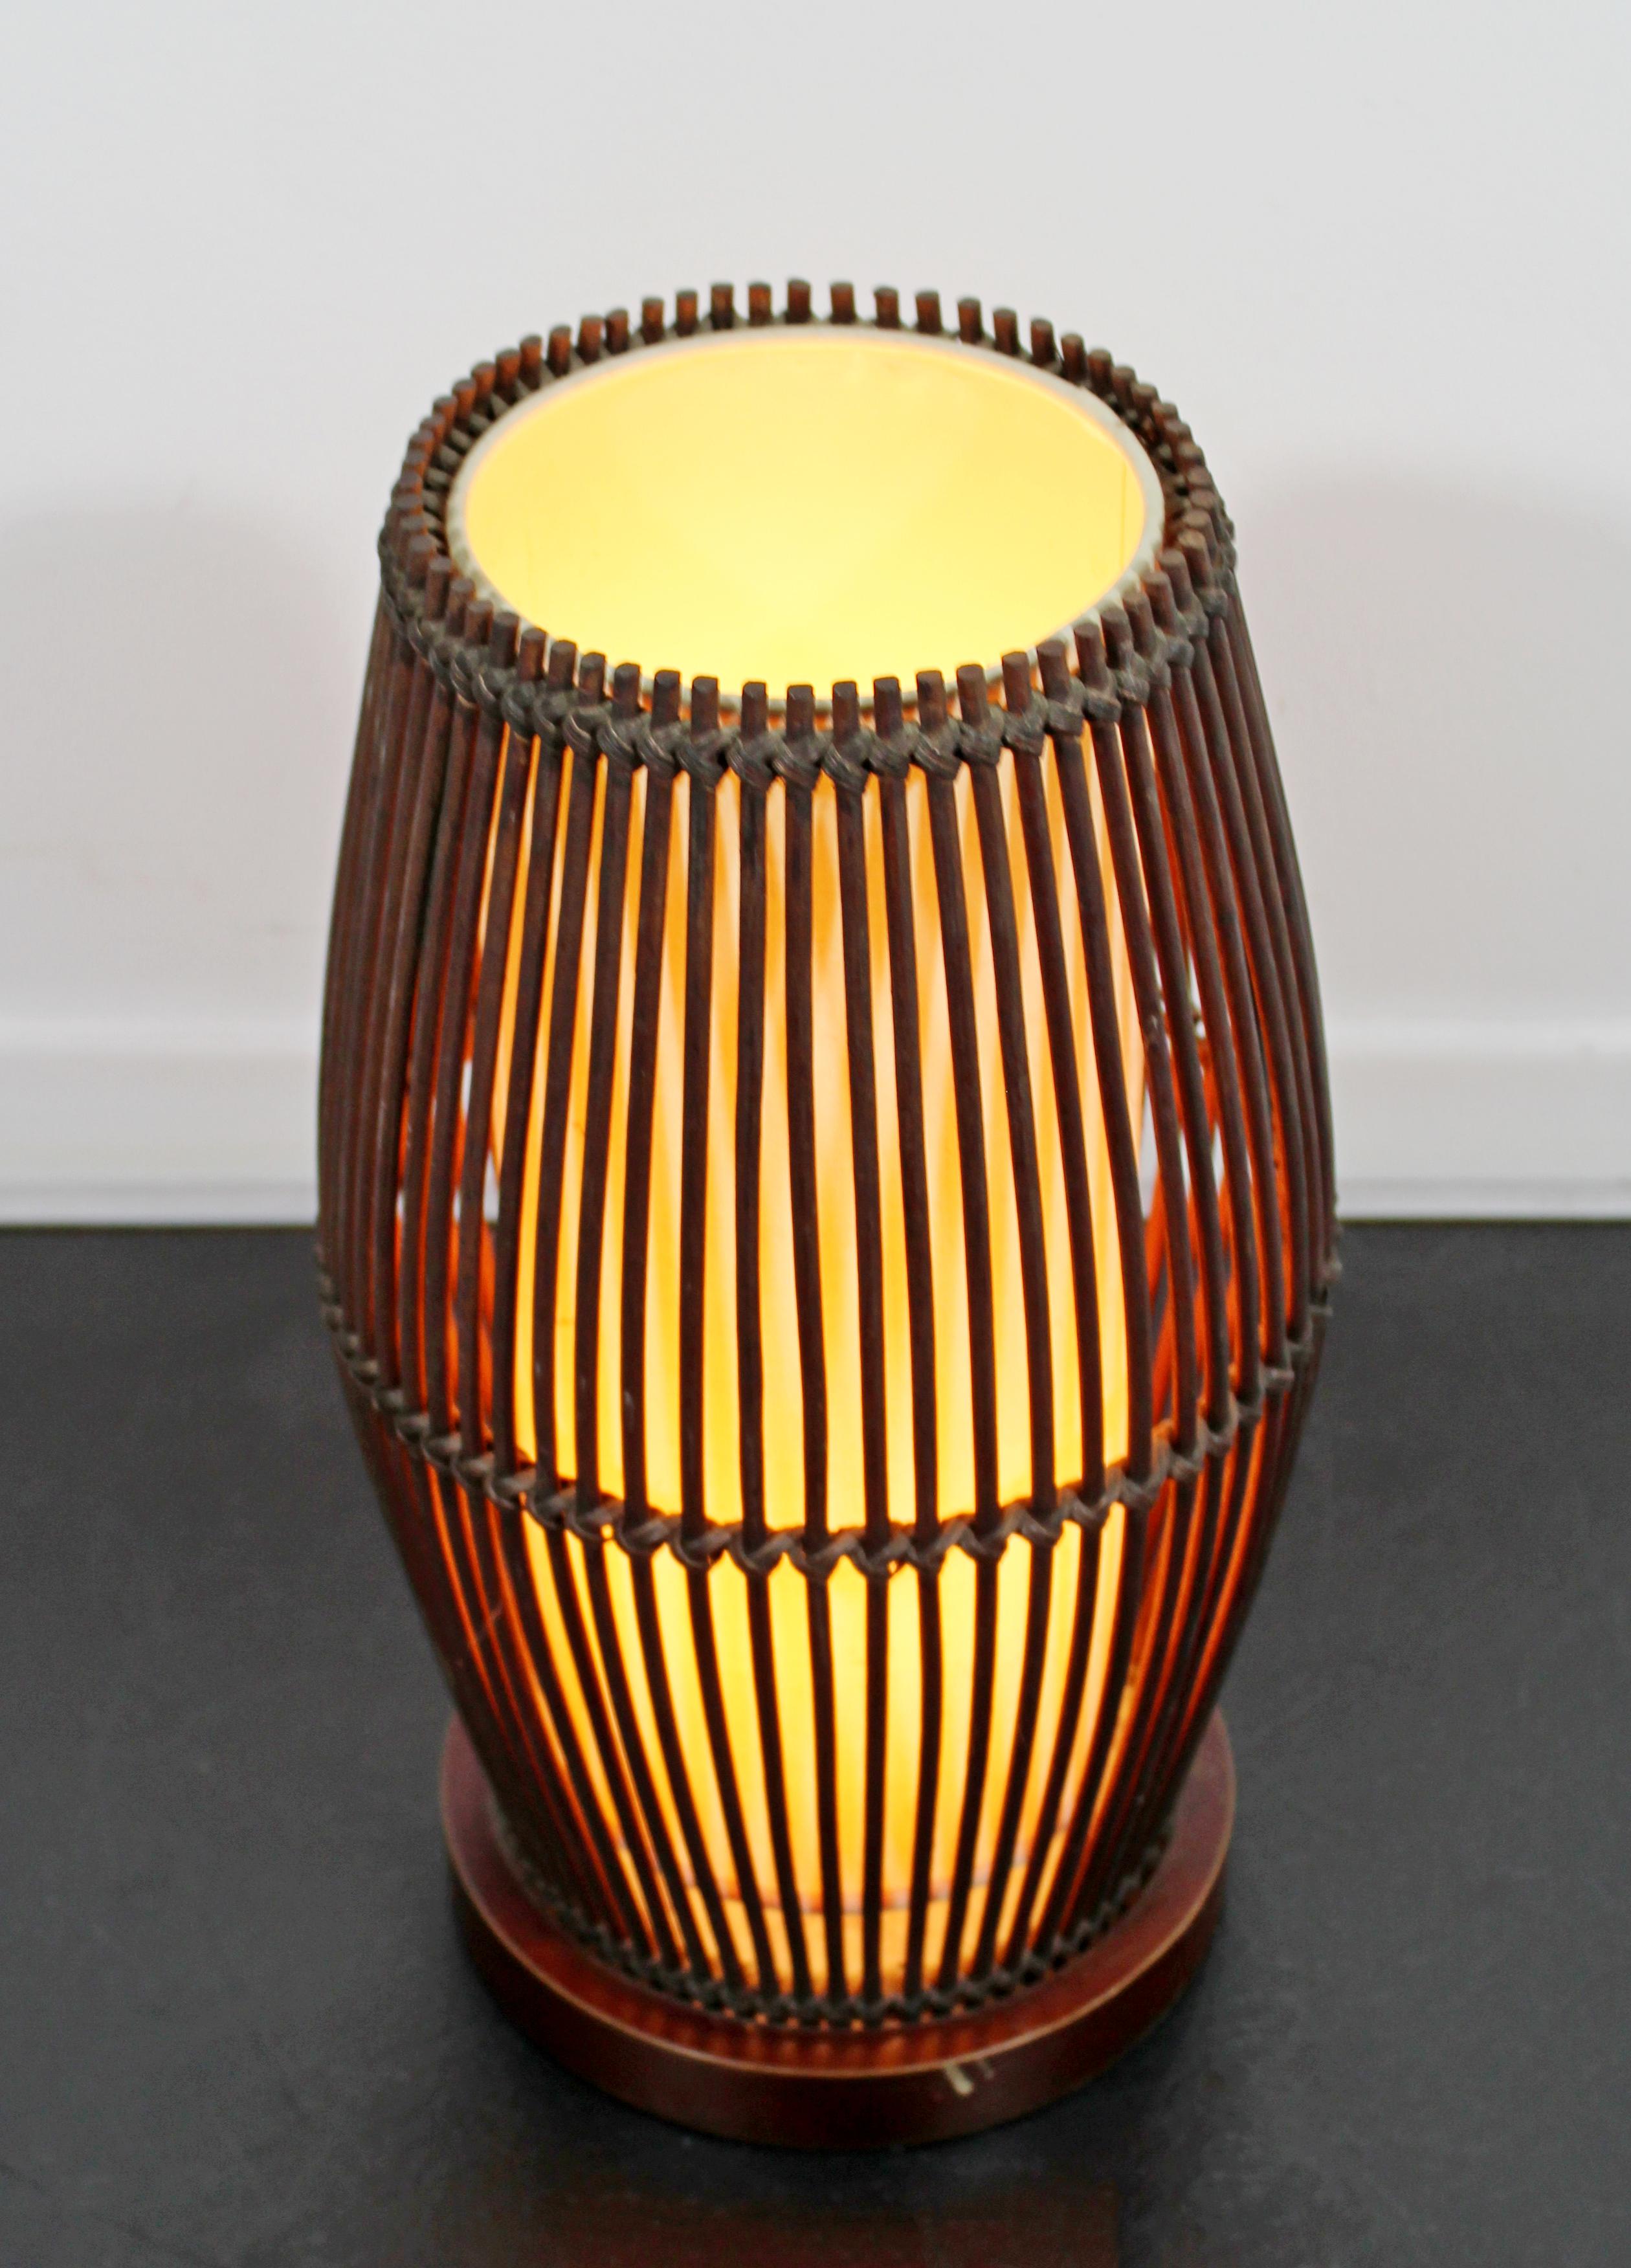 For your consideration is a stunning, vintage uplight table lamp, wrapped in rattan, circa 1960s 1970s. In very good vintage condition. The dimensions are 7